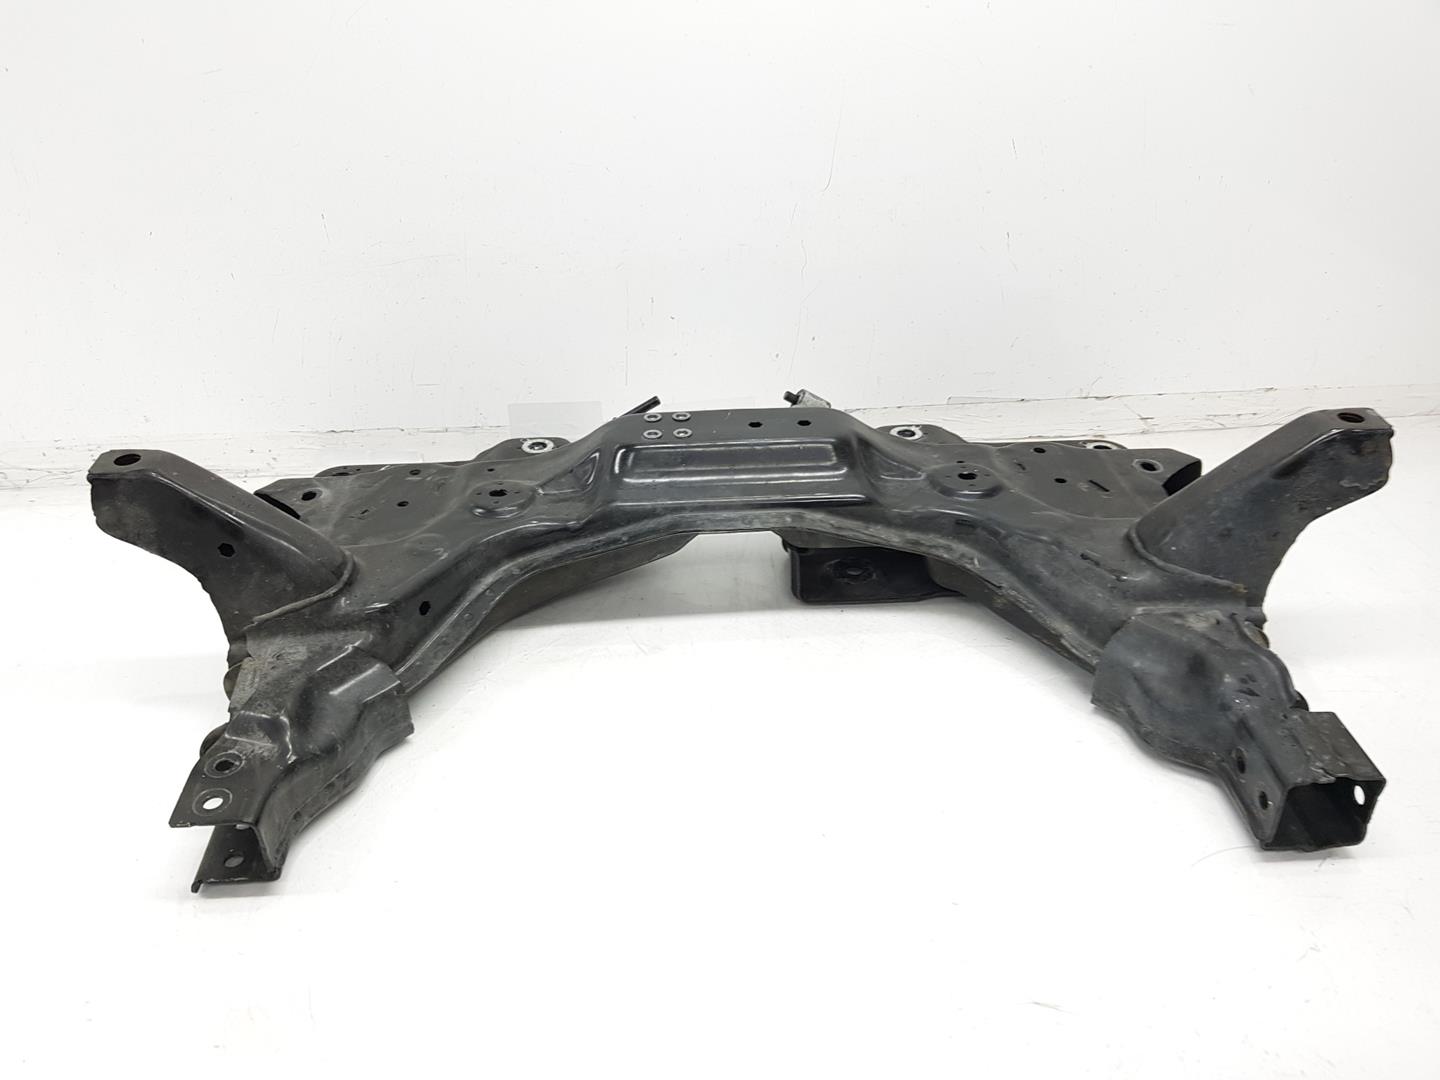 OPEL Corsa D (2006-2020) Front Suspension Subframe 13460173, 13460173 23795371